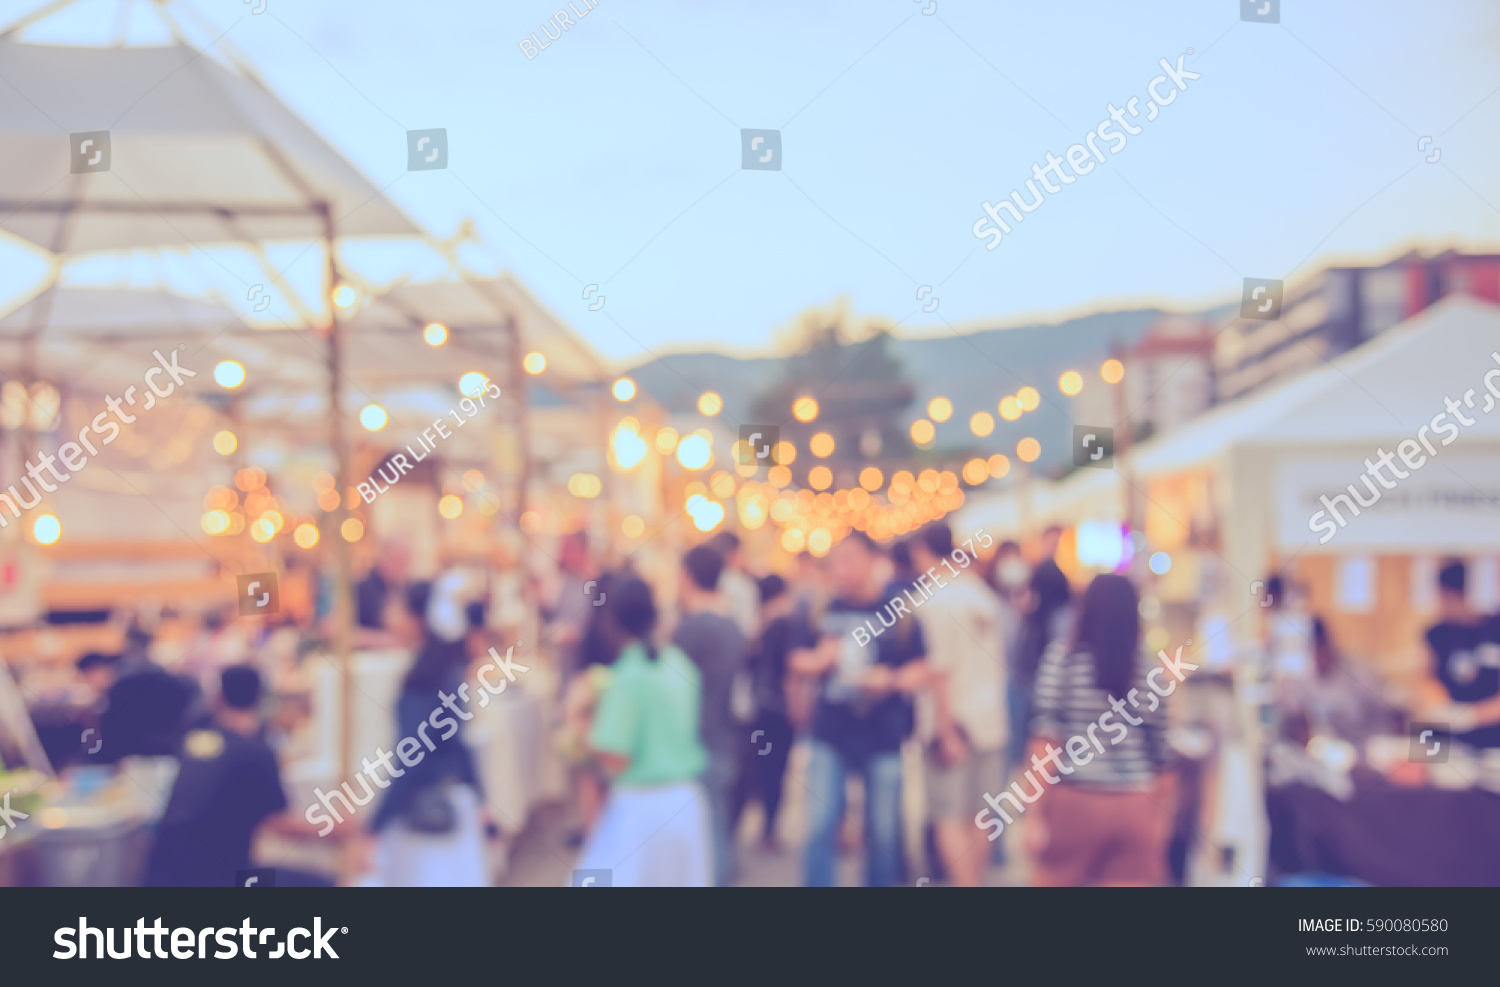 abstract blur image of food stall at day festival for background usage . (vintage tone) #590080580